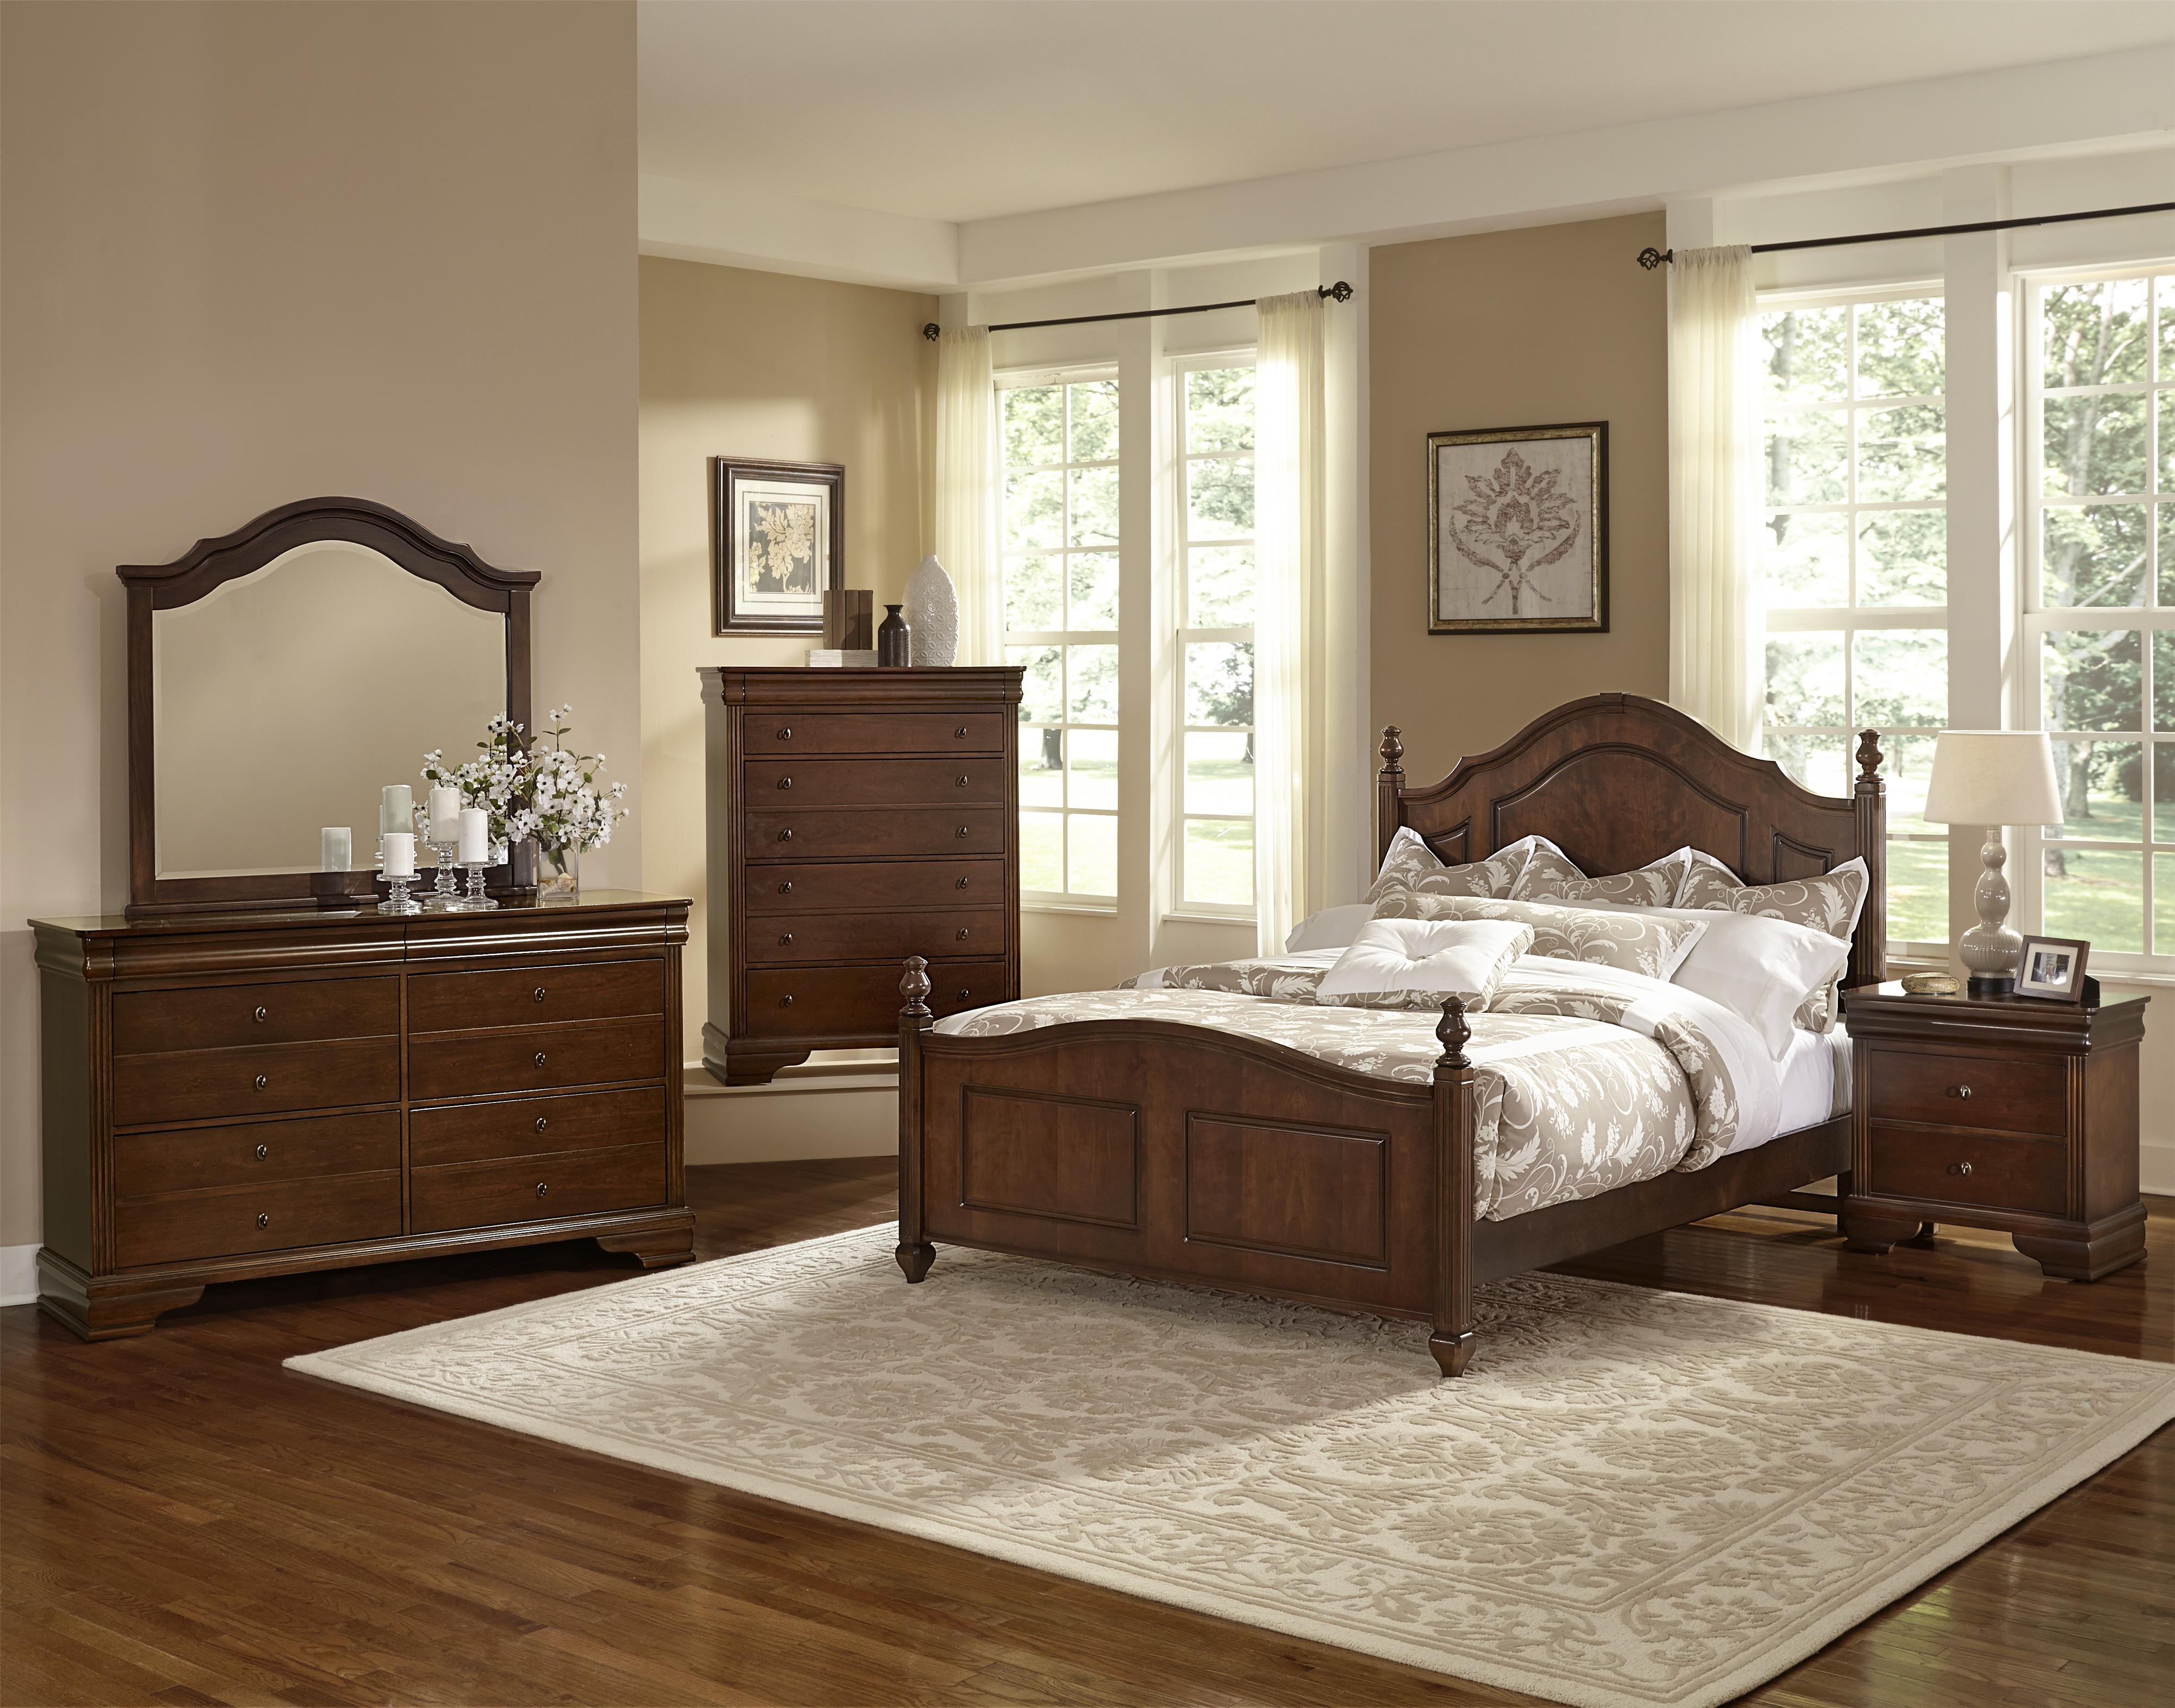 French Market King Bedroom Group Vaughan Bassett At Dunk Bright Furniture pertaining to proportions 4000 X 3142